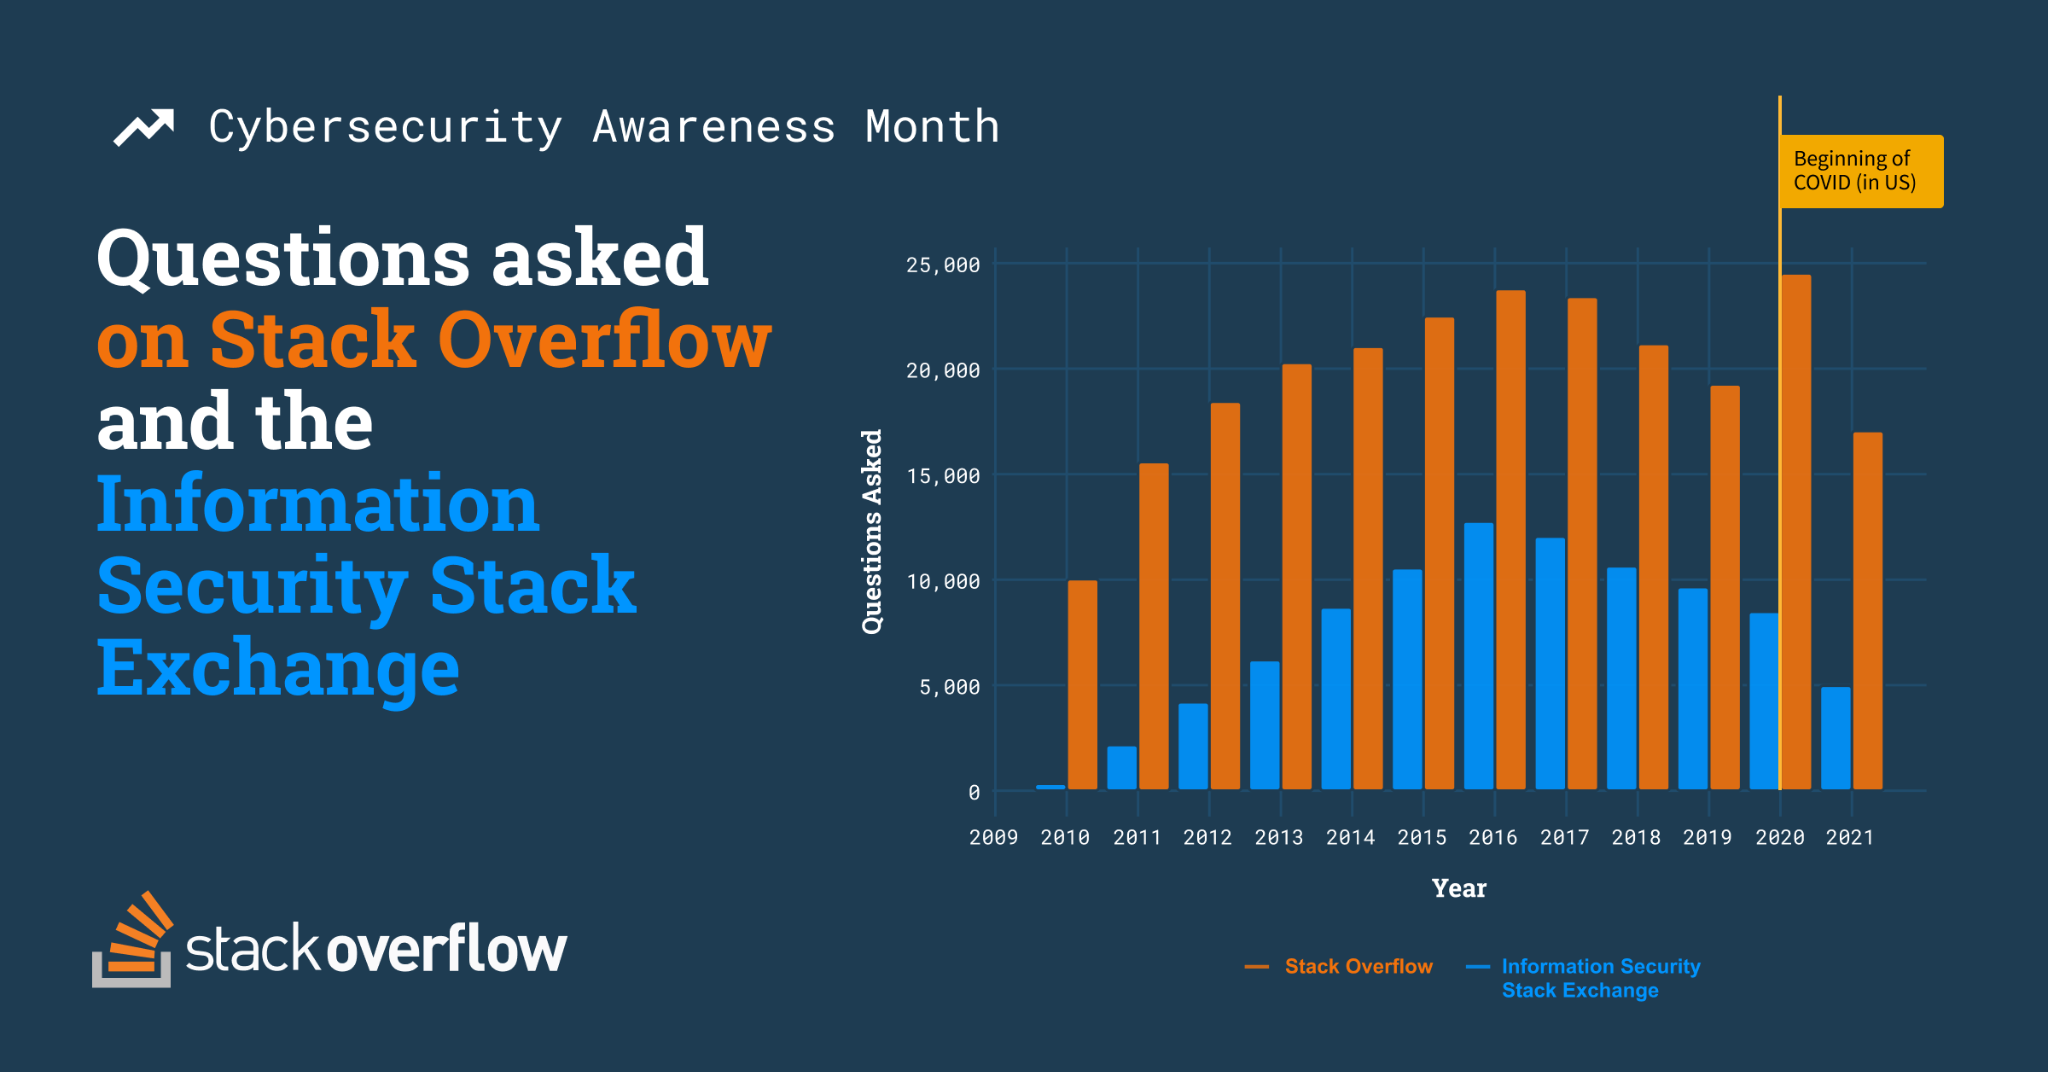 Bar chart comparing questions asked on Stack Overflow related to security and questions asked on Information Security Stack Exchange site by year. Stack Overflow hit an all-time high in 2020 while Information Security Stack Exchange questions peaked in late 2016 and began to decline.